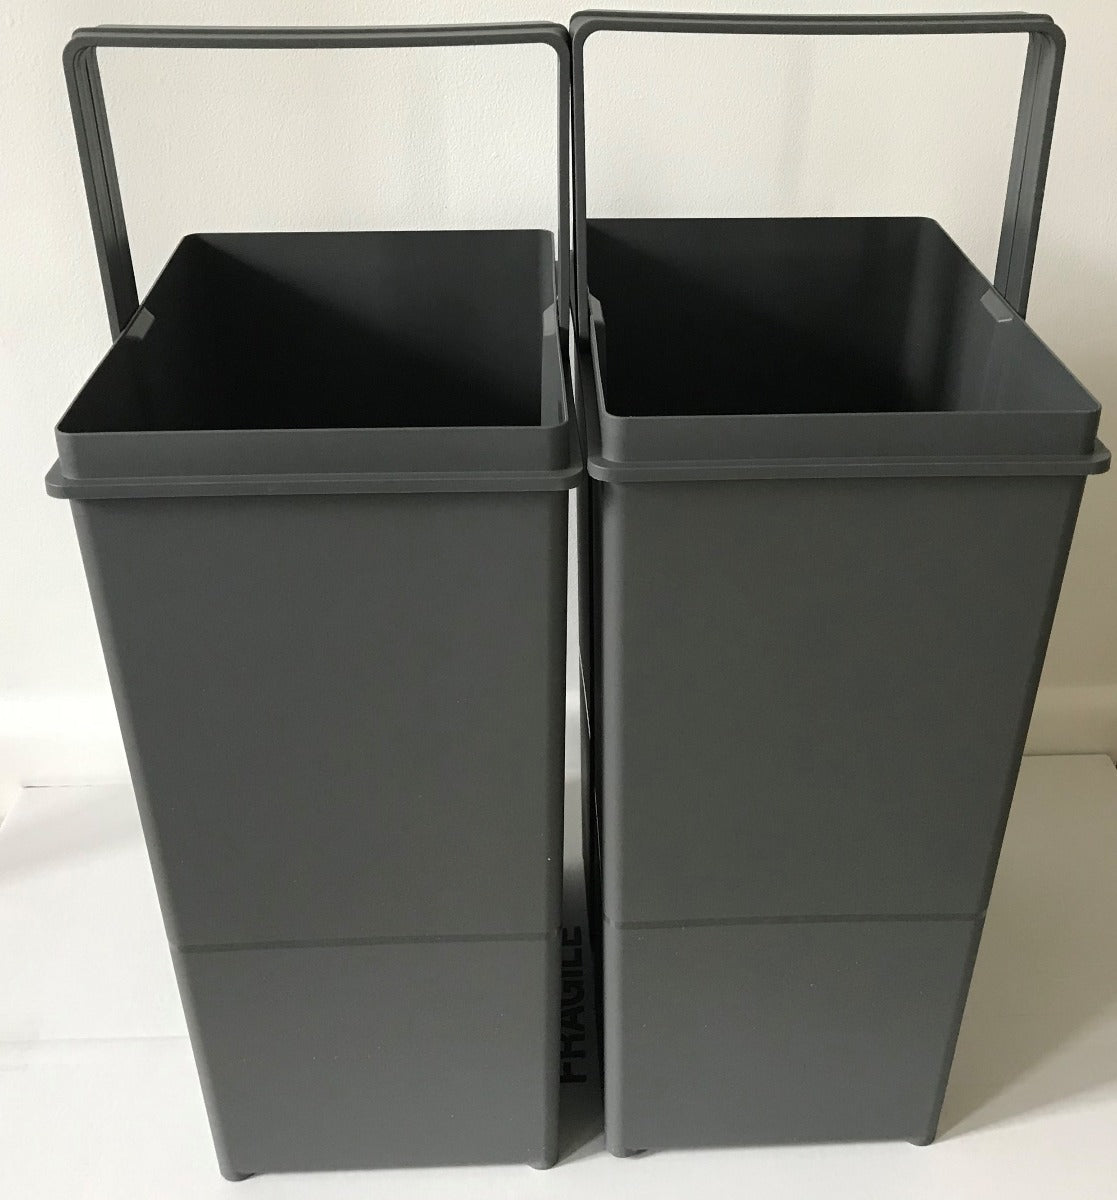 The 40l buckets in a smart , dark Orion Grey both have ingratiated handles